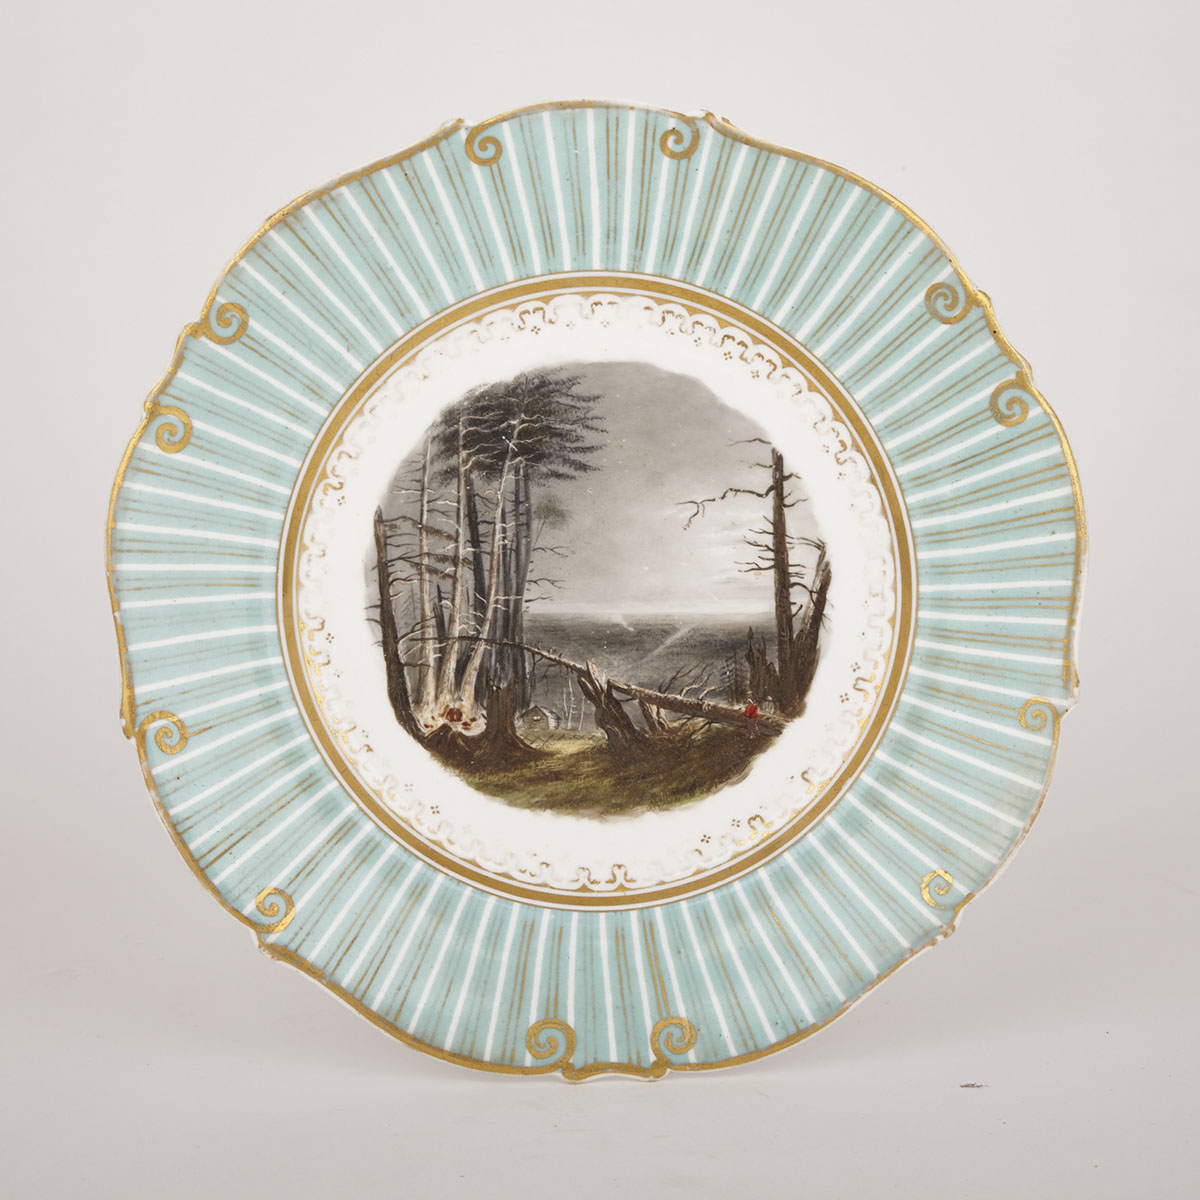 English Porcelain Lake Ontario Topographical Plate, mid-19th century